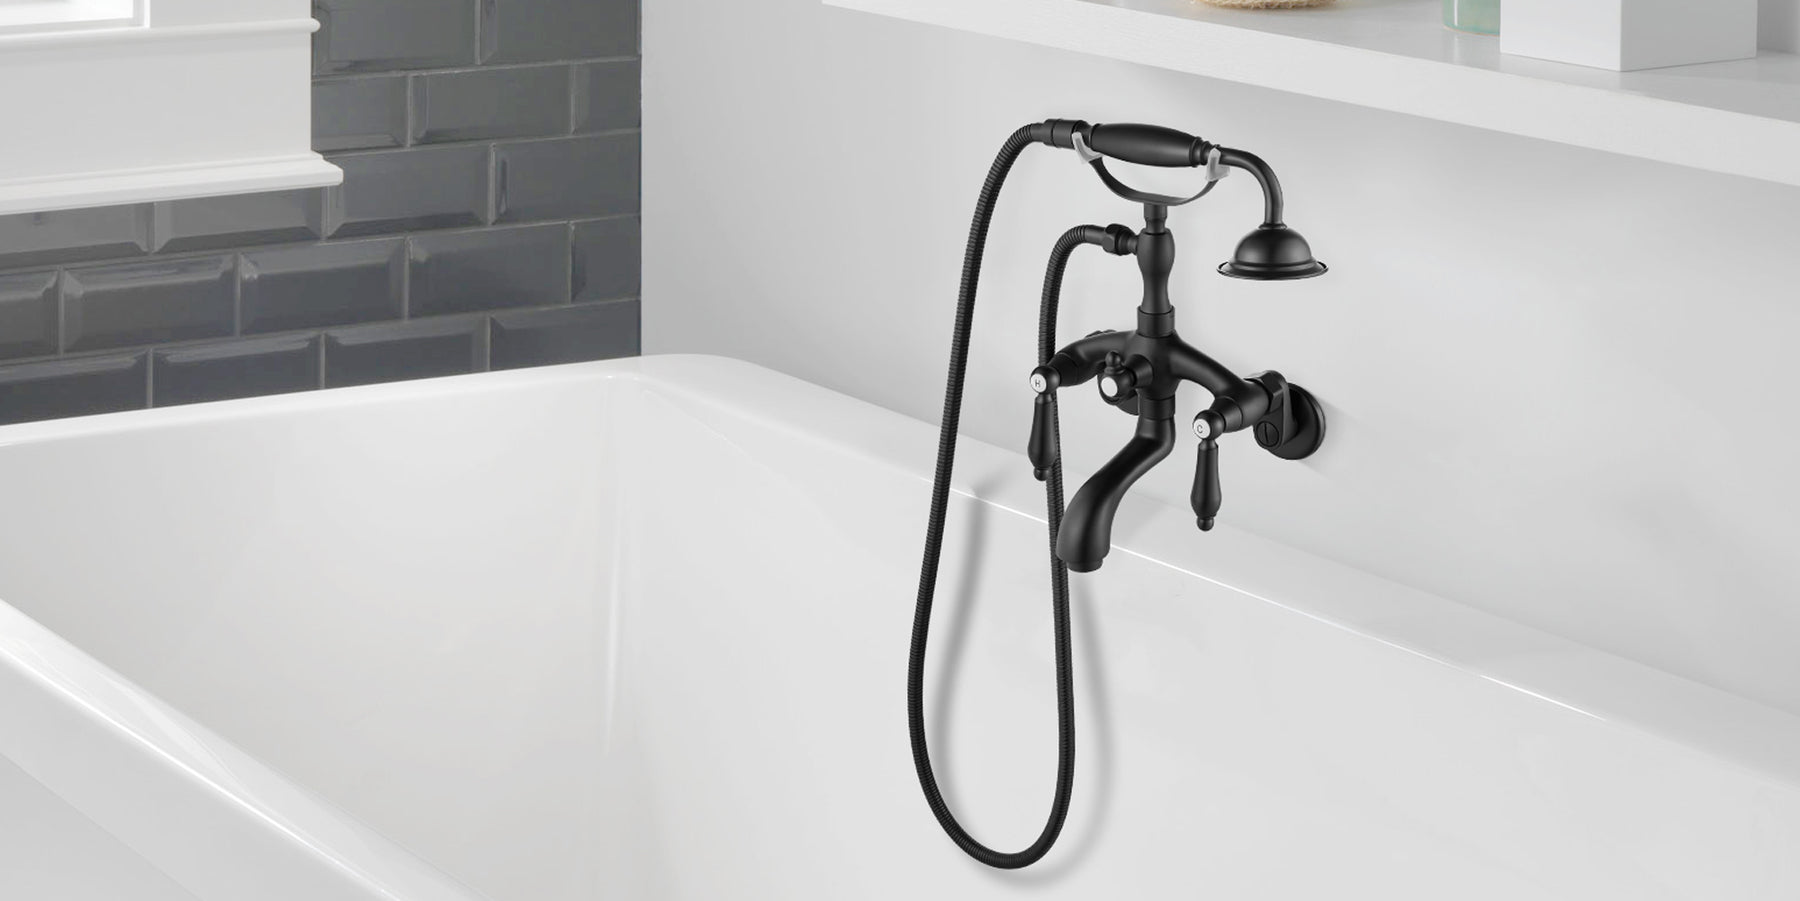 gotonovo Matte Black Wall Mount 3 3/8 Clawfoot Tub Faucet For Bathtub with Hand Held Shower Sprayer Double Level Handle with Hot and Cold Water Adapter Adjustable Swing Arms